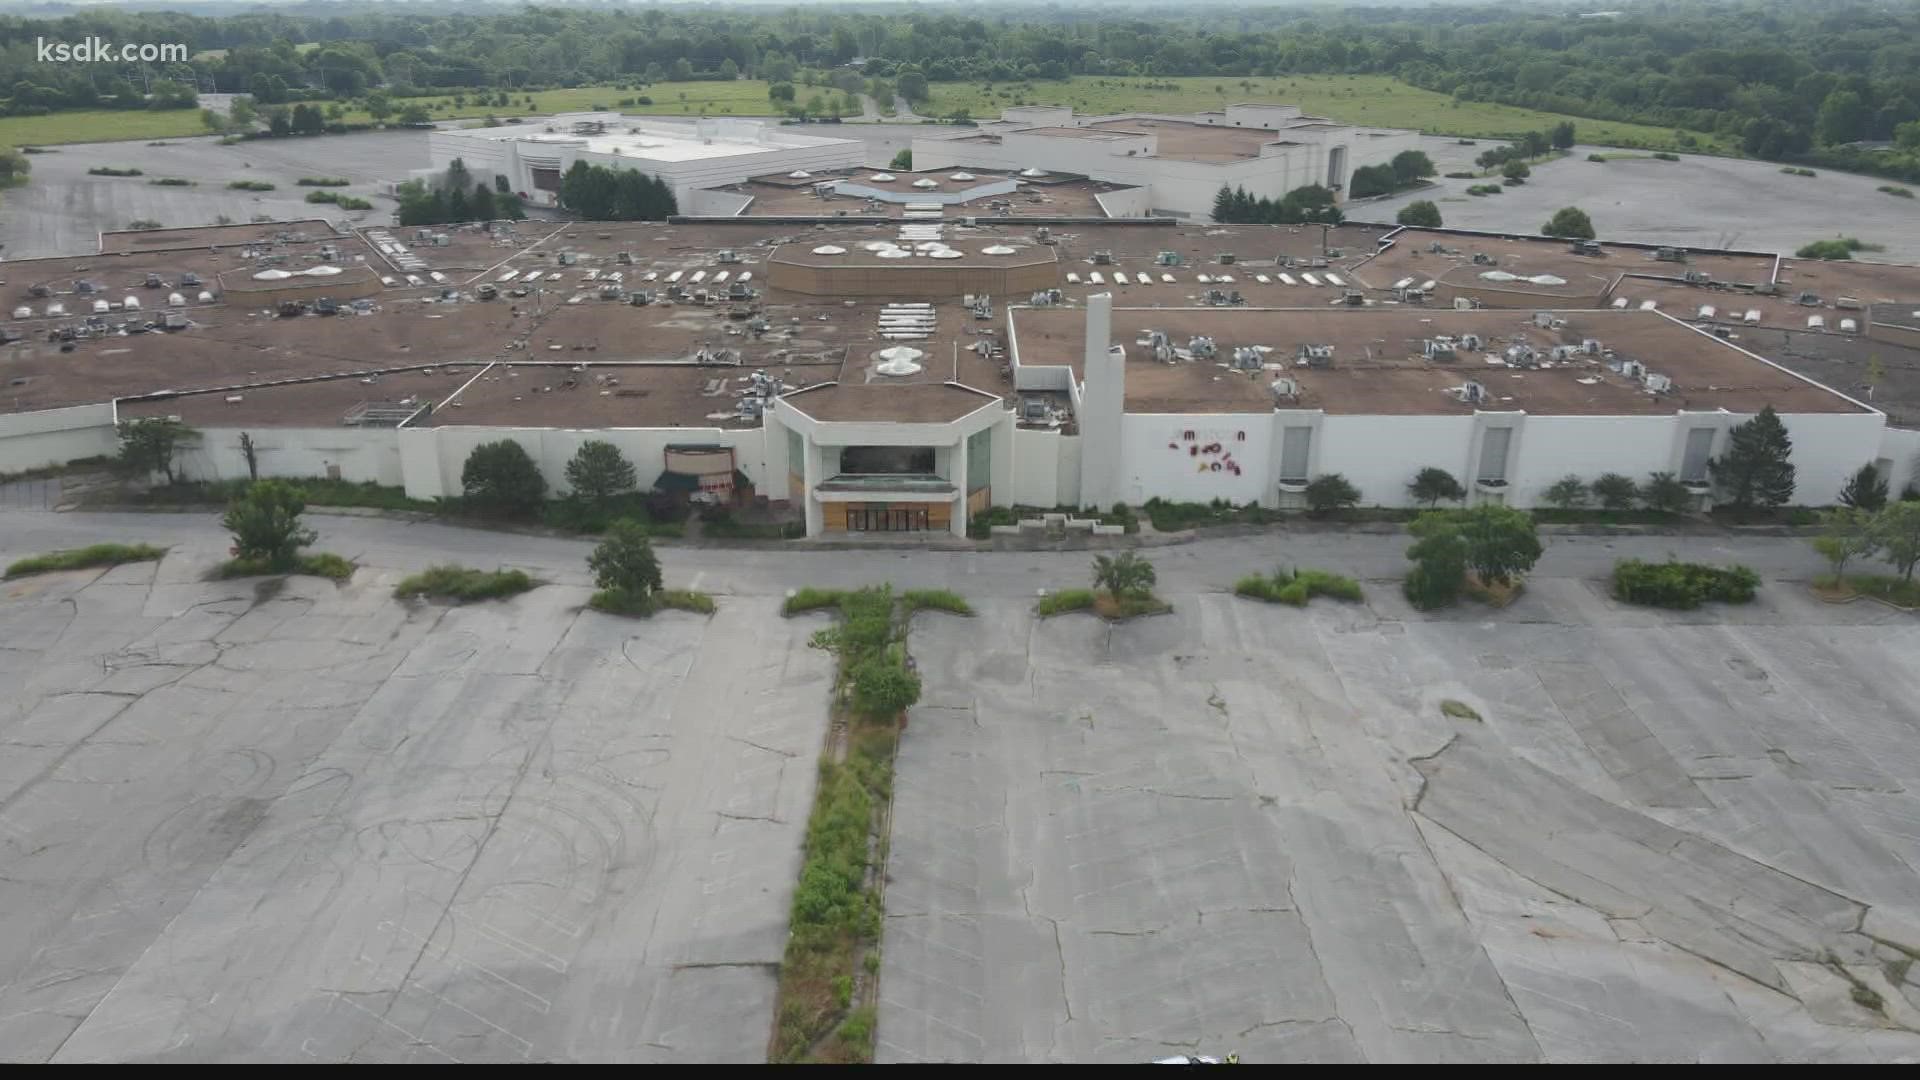 The St. Louis County Council voted unanimously to set aside $6M to demolish the mall. The project itself is around $10 million.